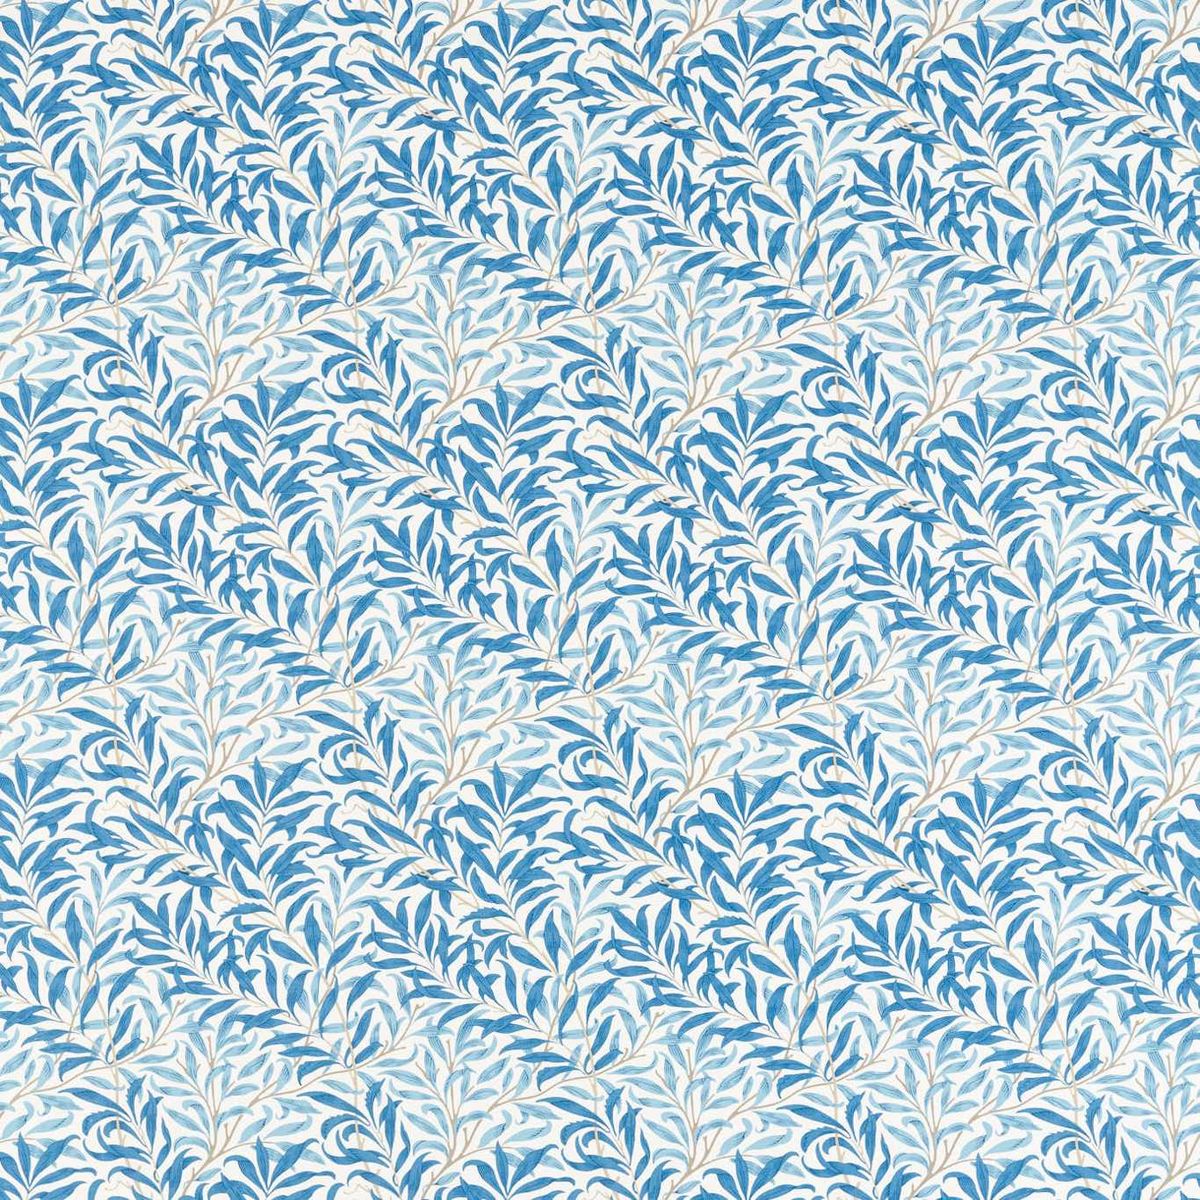 Willow Boughs Woad Fabric by William Morris & Co.